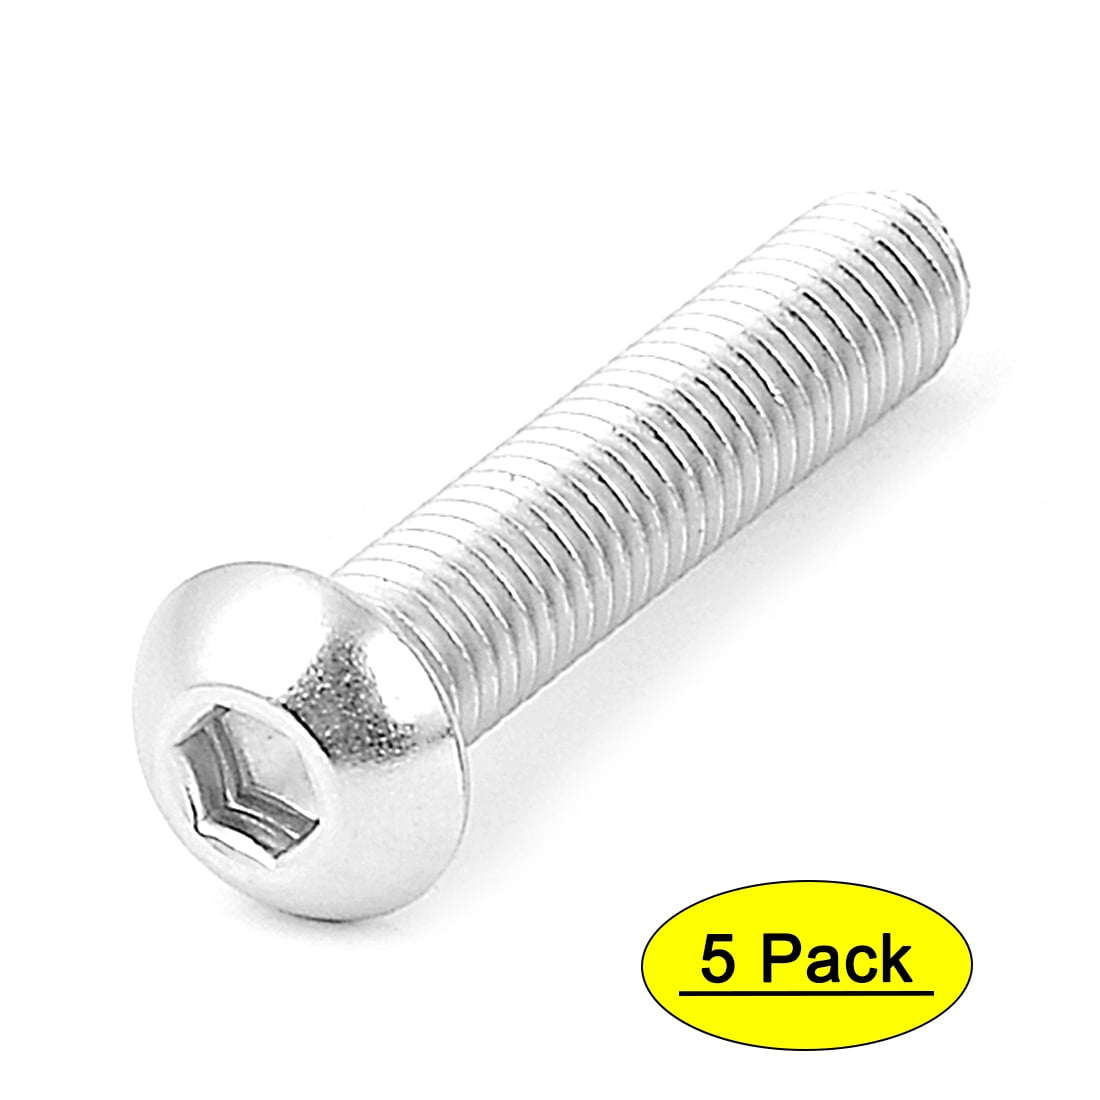 Color : Stainless Steel 304, Size : 14mm Happy Shop Screw 5-50pcs Allen Key Head Din7991 M2 M2.5 M3 M4 M5 M6 Stainless Steel 304 or Black Hex Socket Flat Countersunk Head Screw Bolts Nuts